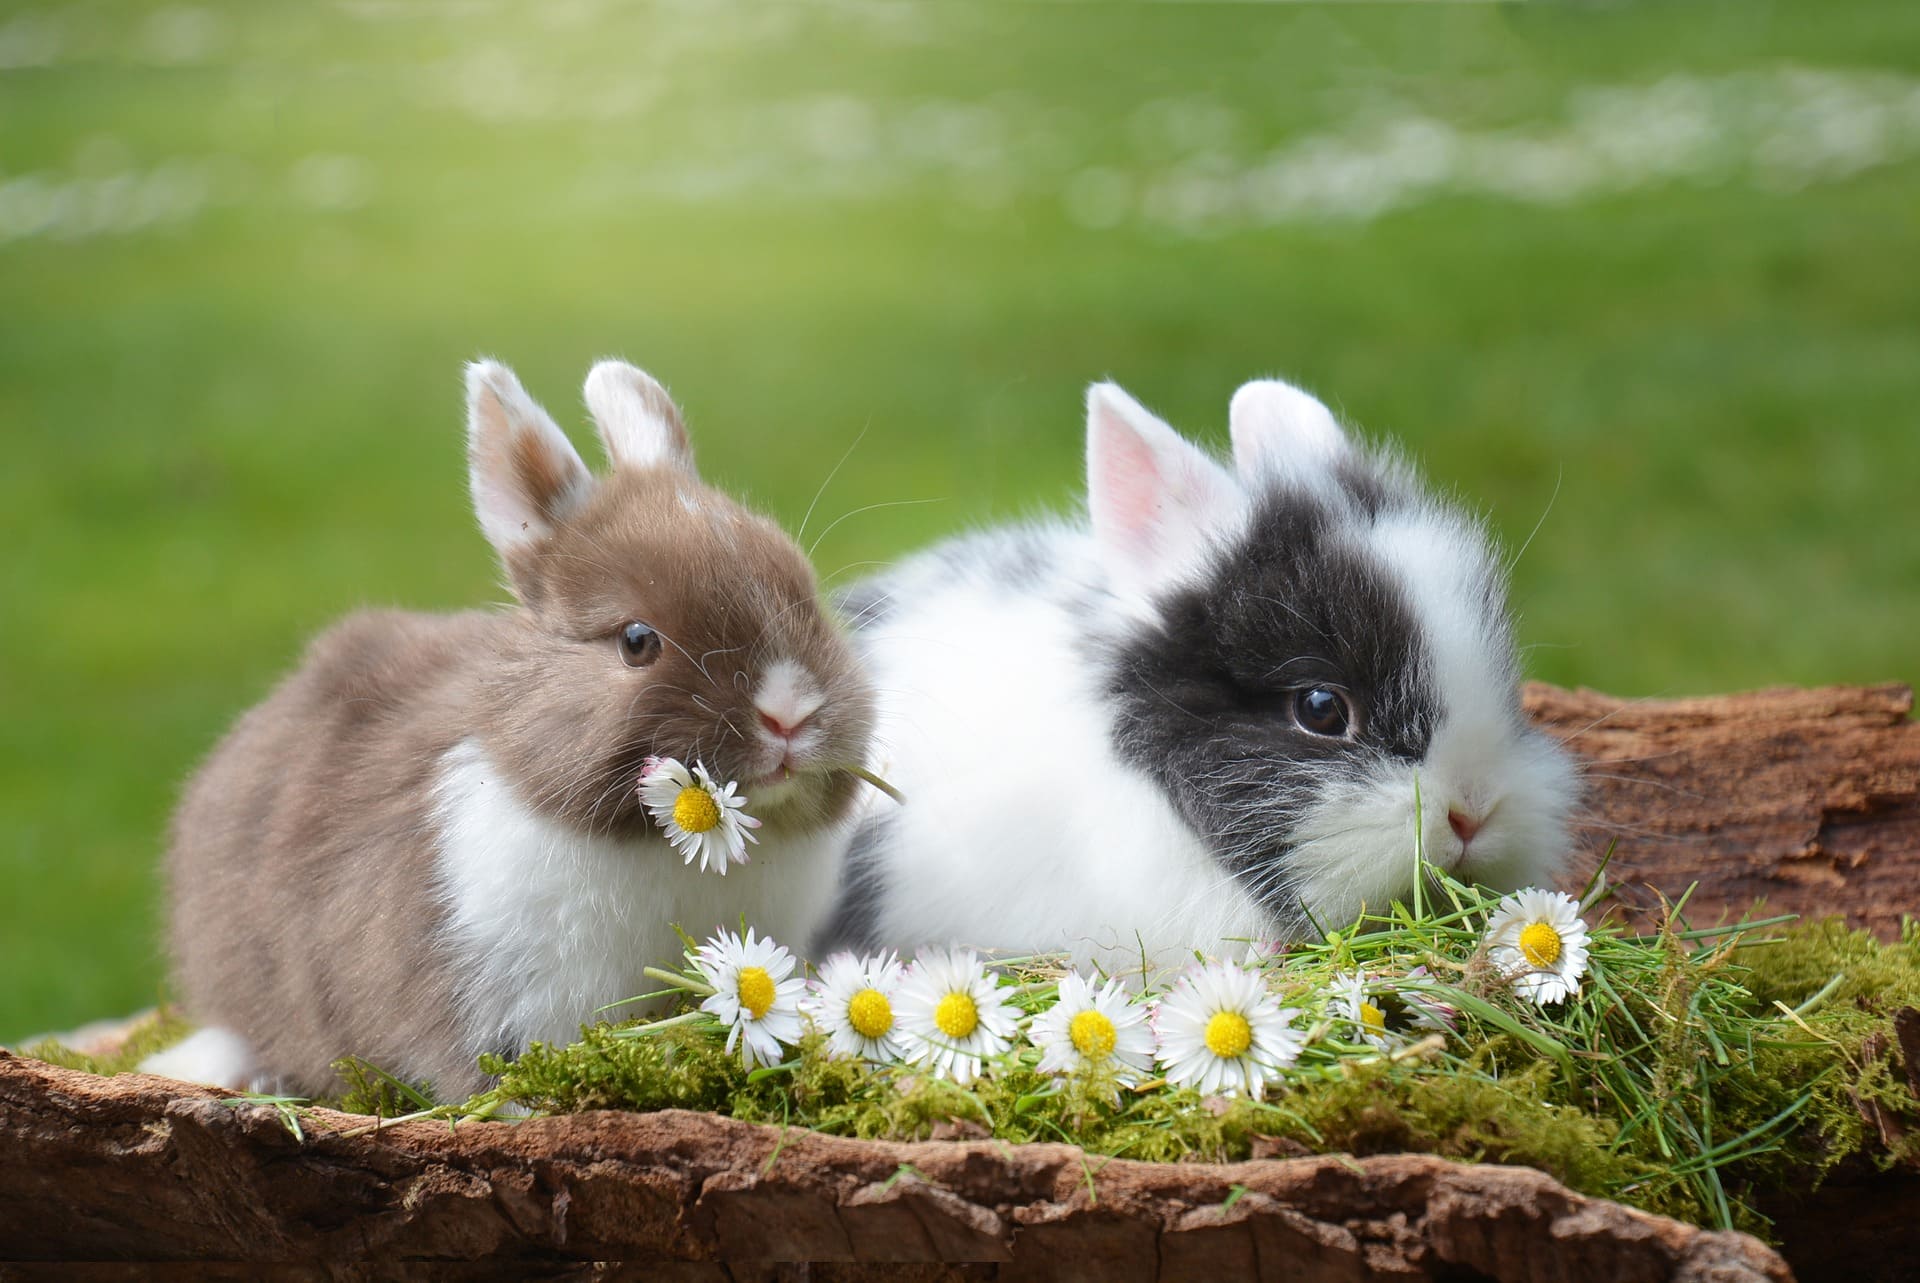 Two fluffy rabbits eating flowers  | Source: Pixabay